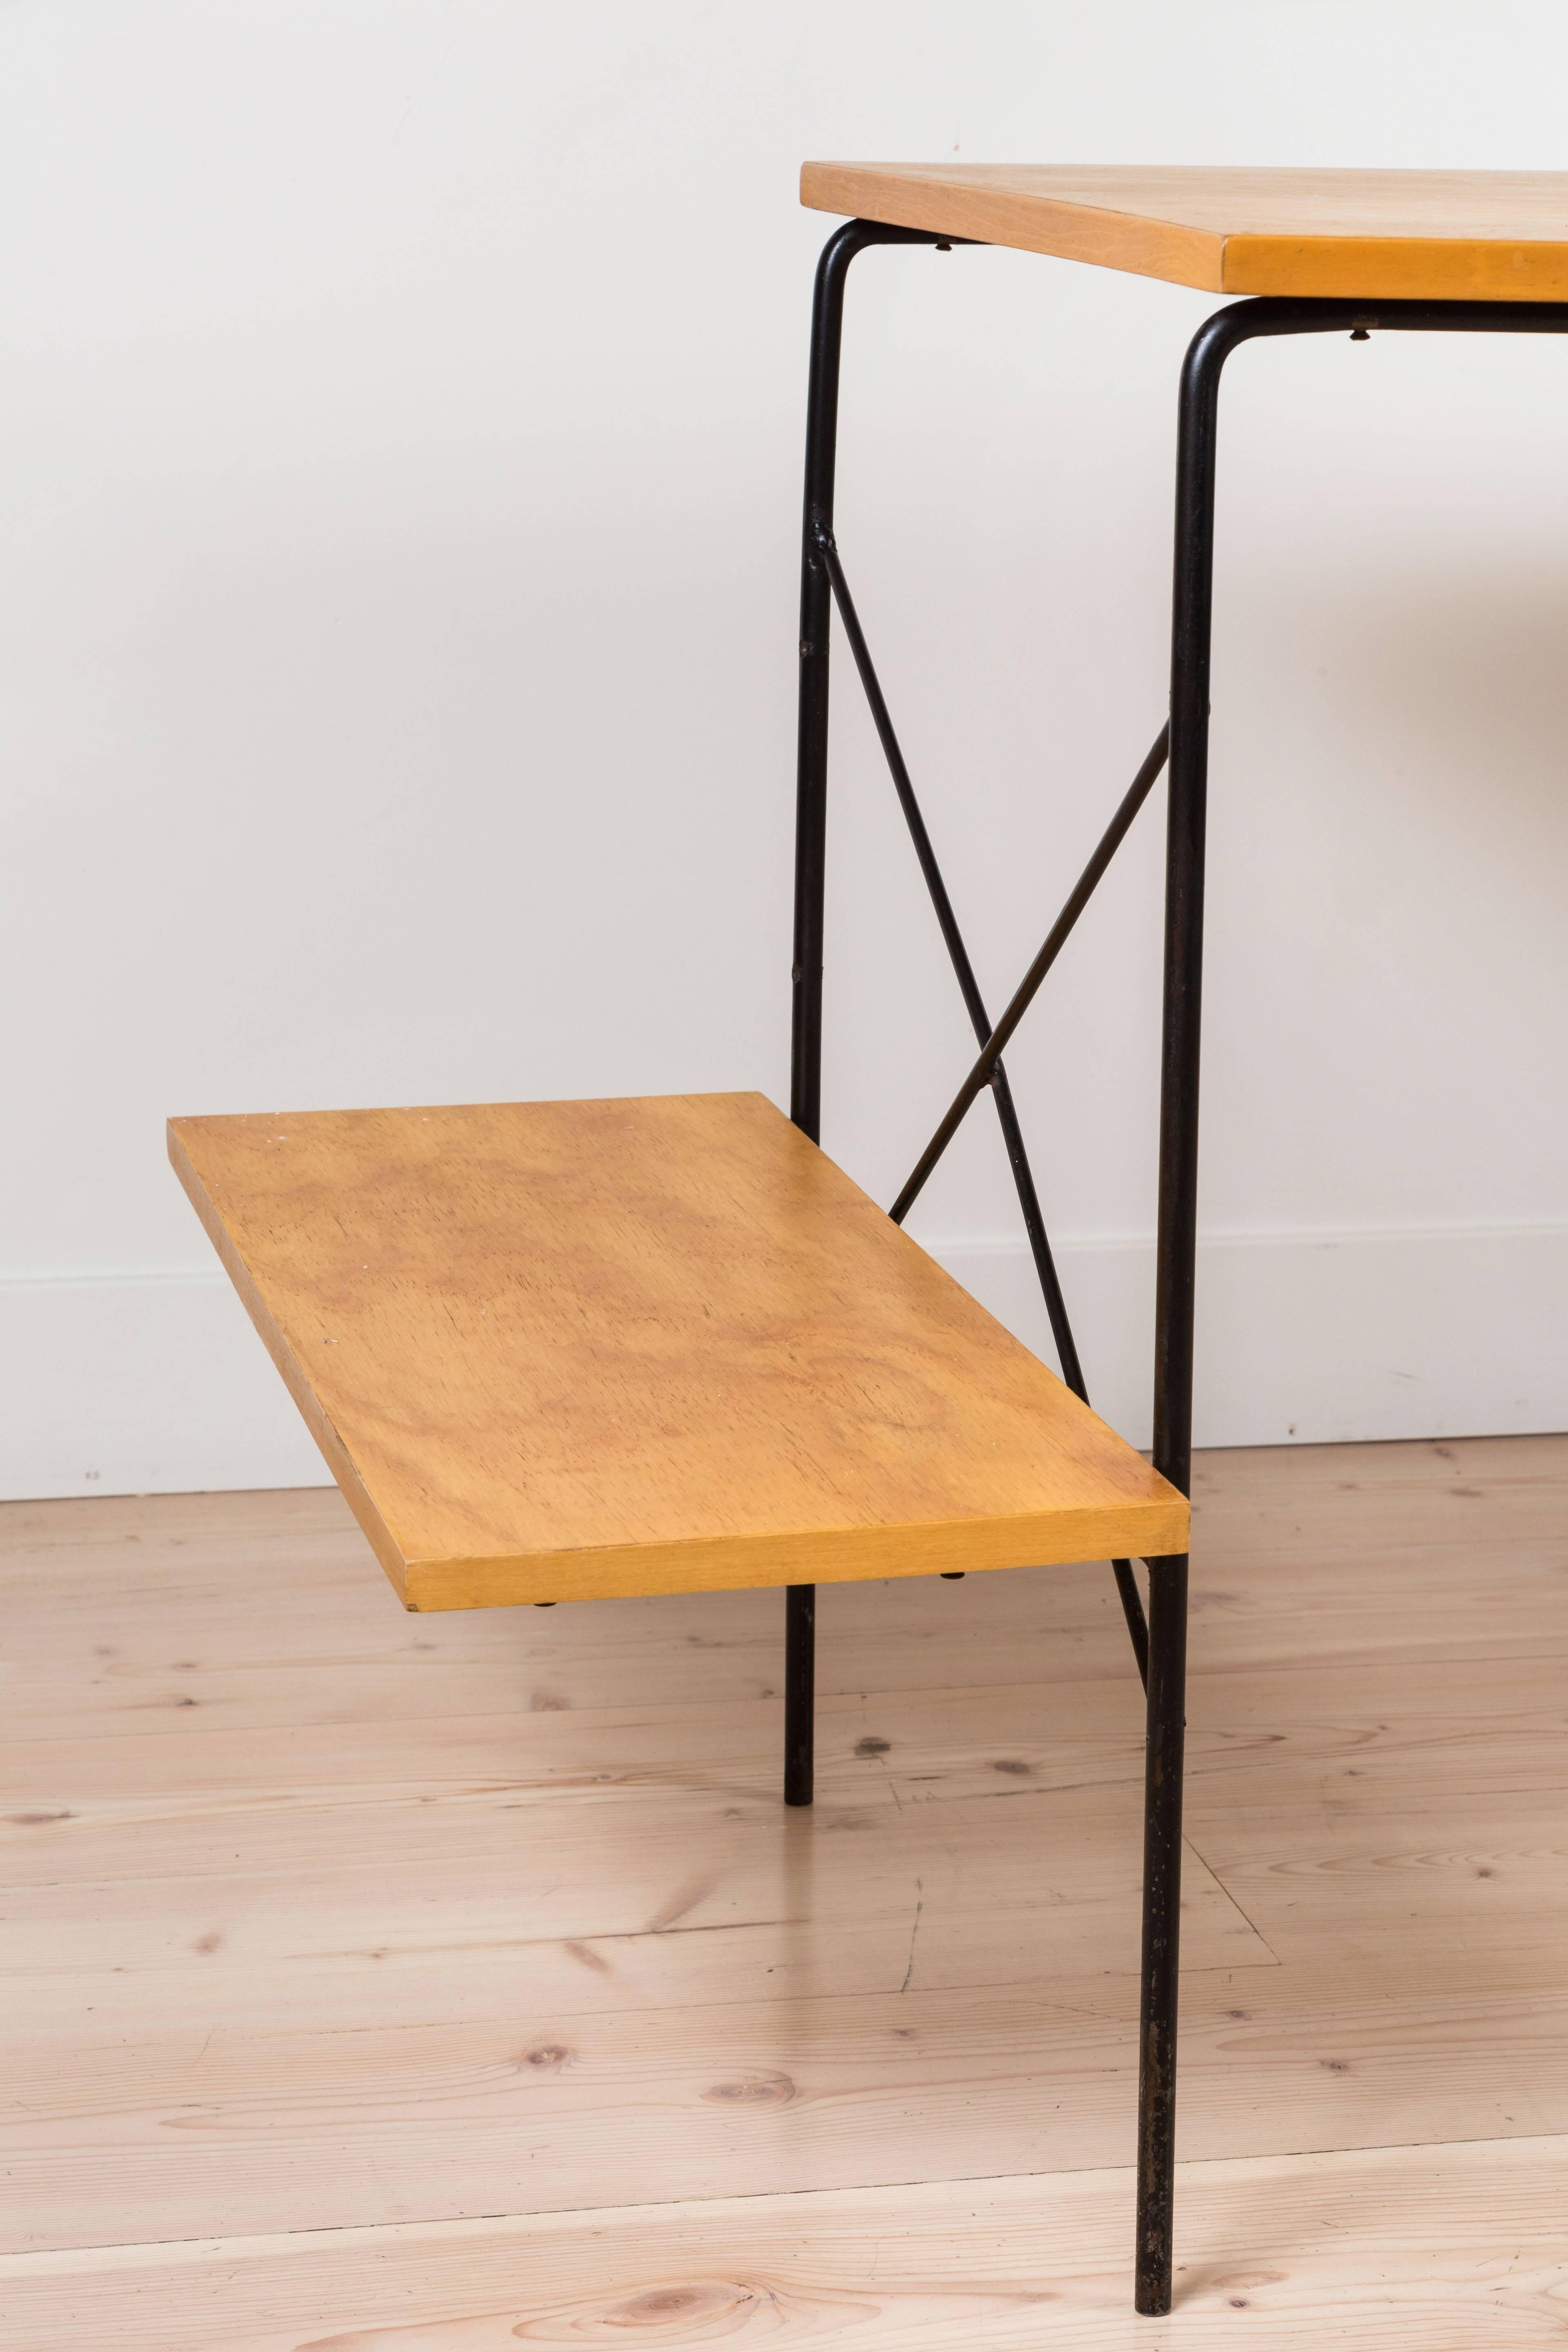 Iron and maple desk by Dorothy Schindele for Modern Color CA.